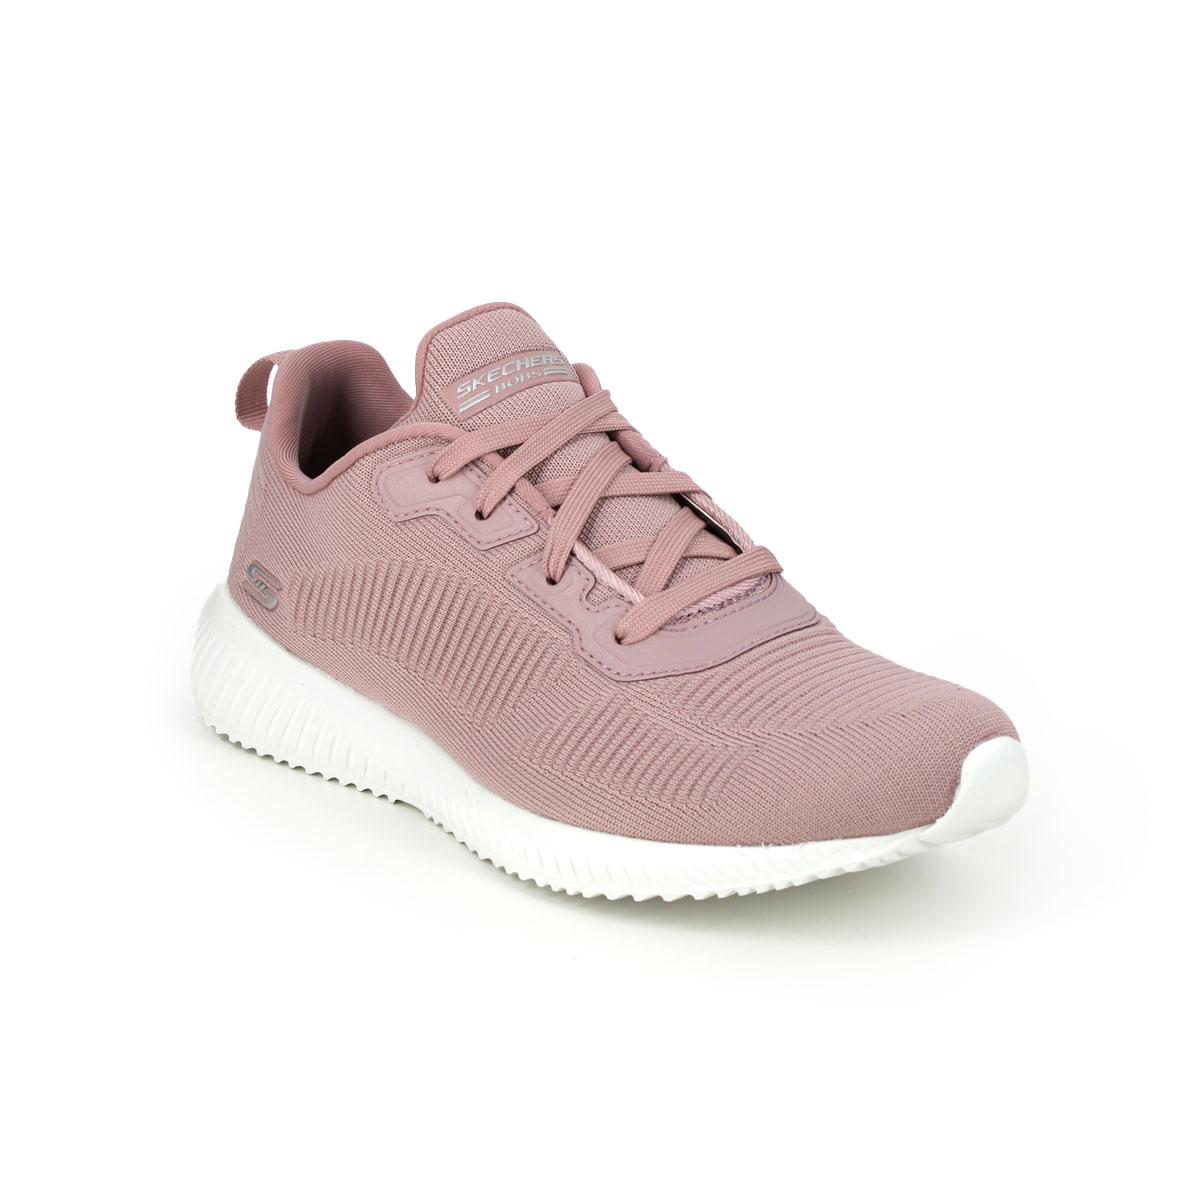 Skechers Bobs Squad BLSH Blush Pink Womens trainers 32504 in a Plain Textile in Size 7